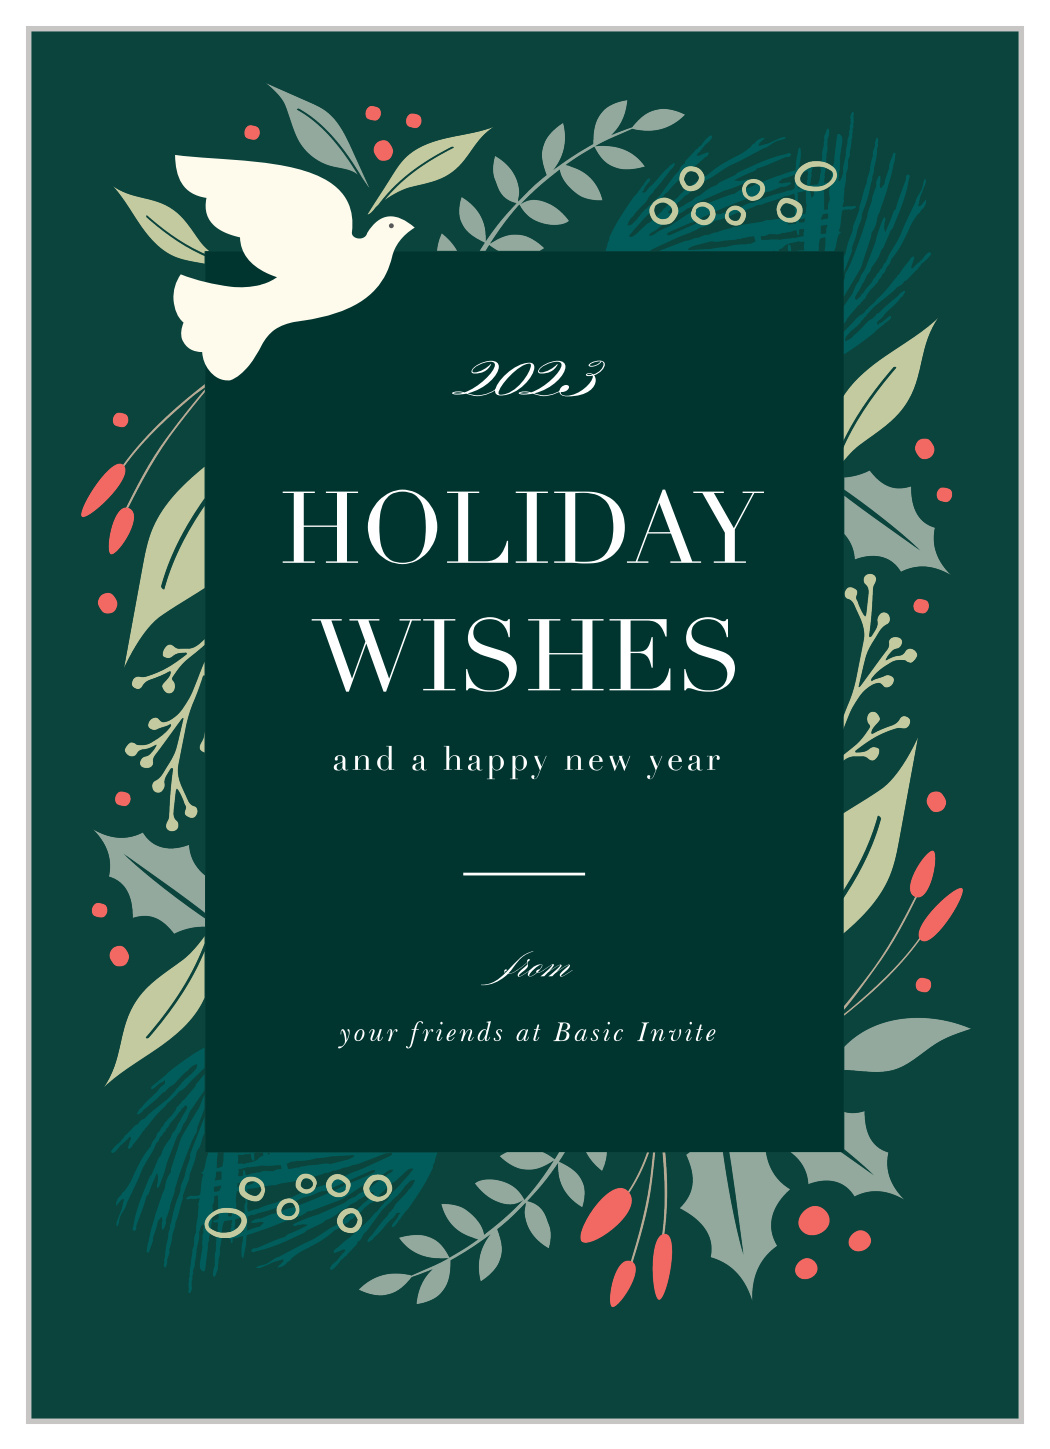 Evergreen Medley Corporate Holiday Cards